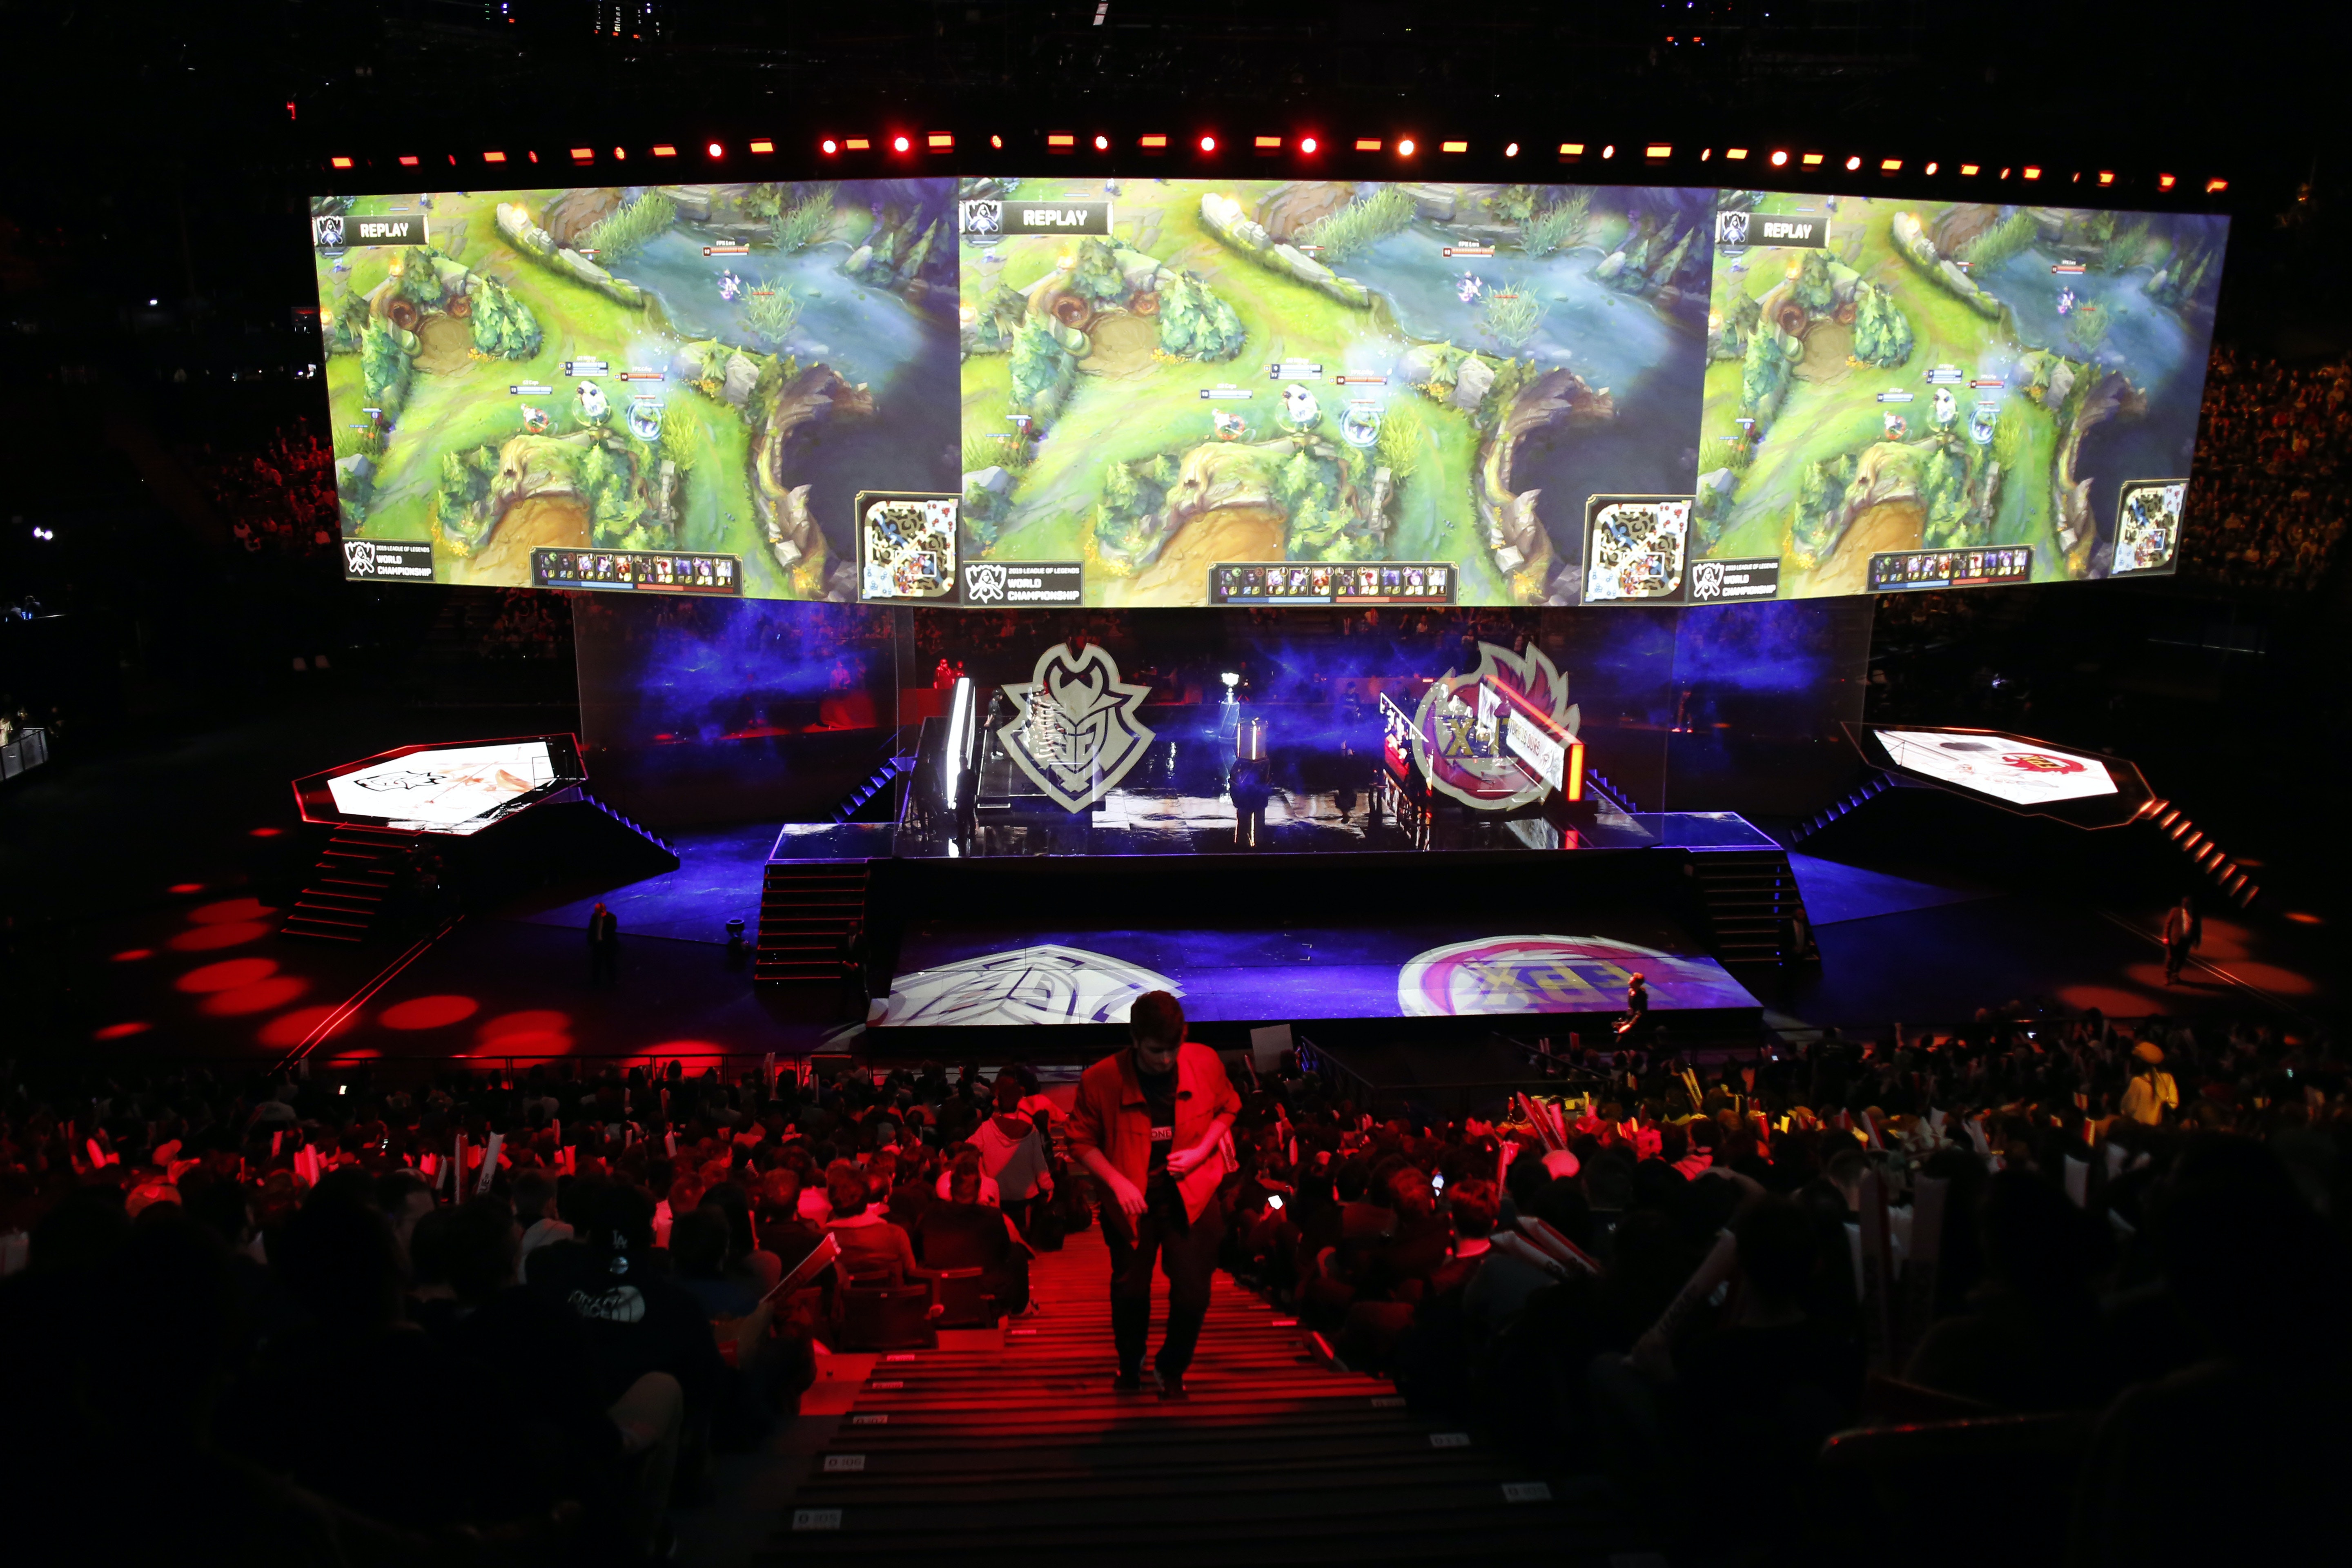 An arena full of people watching an international videogame tournament